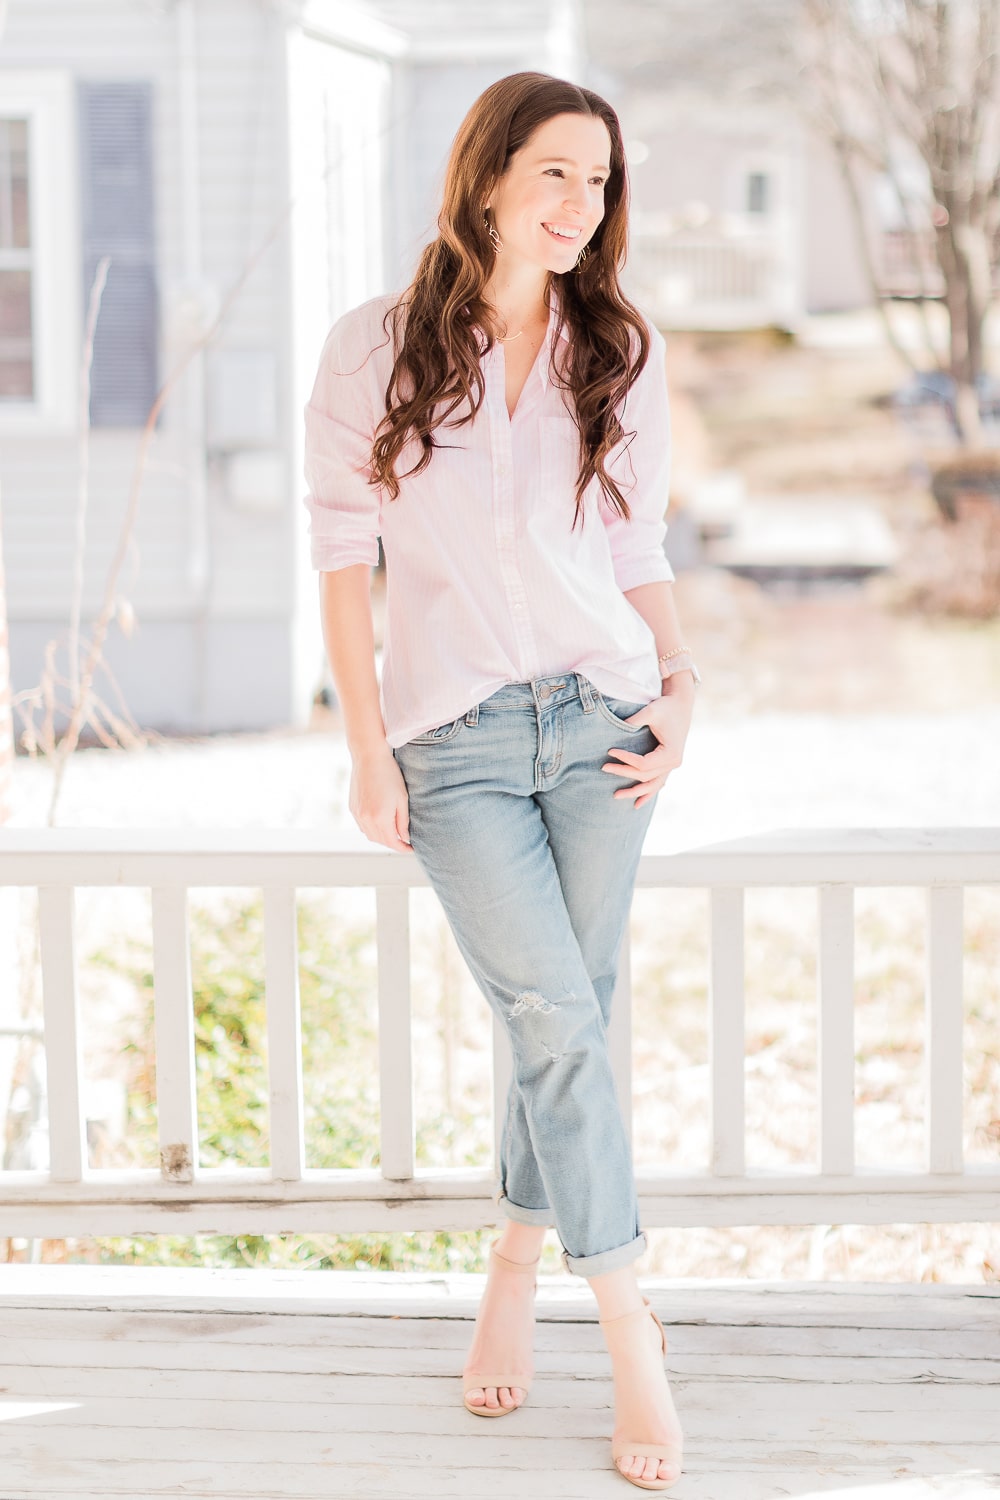 Affordable fashion blogger Stephanie Ziajka shares a casual girlfriend jeans outfit on Diary of a Debutante